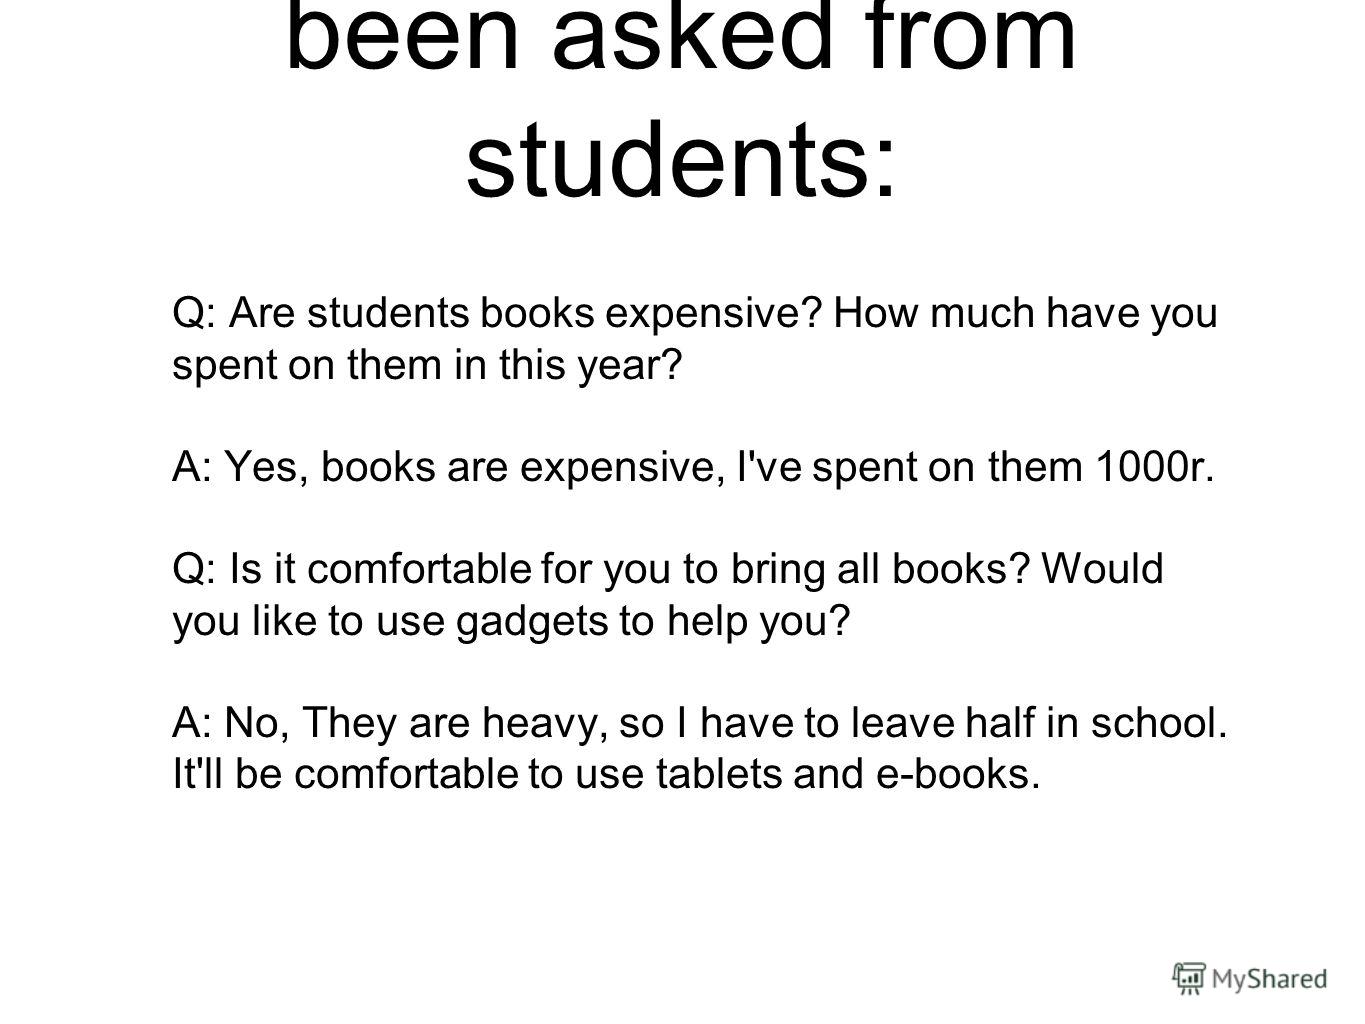 Some questions have been asked from students: Q: Are students books expensive? How much have you spent on them in this year? A: Yes, books are expensive, I've spent on them 1000r. Q: Is it comfortable for you to bring all books? Would you like to use